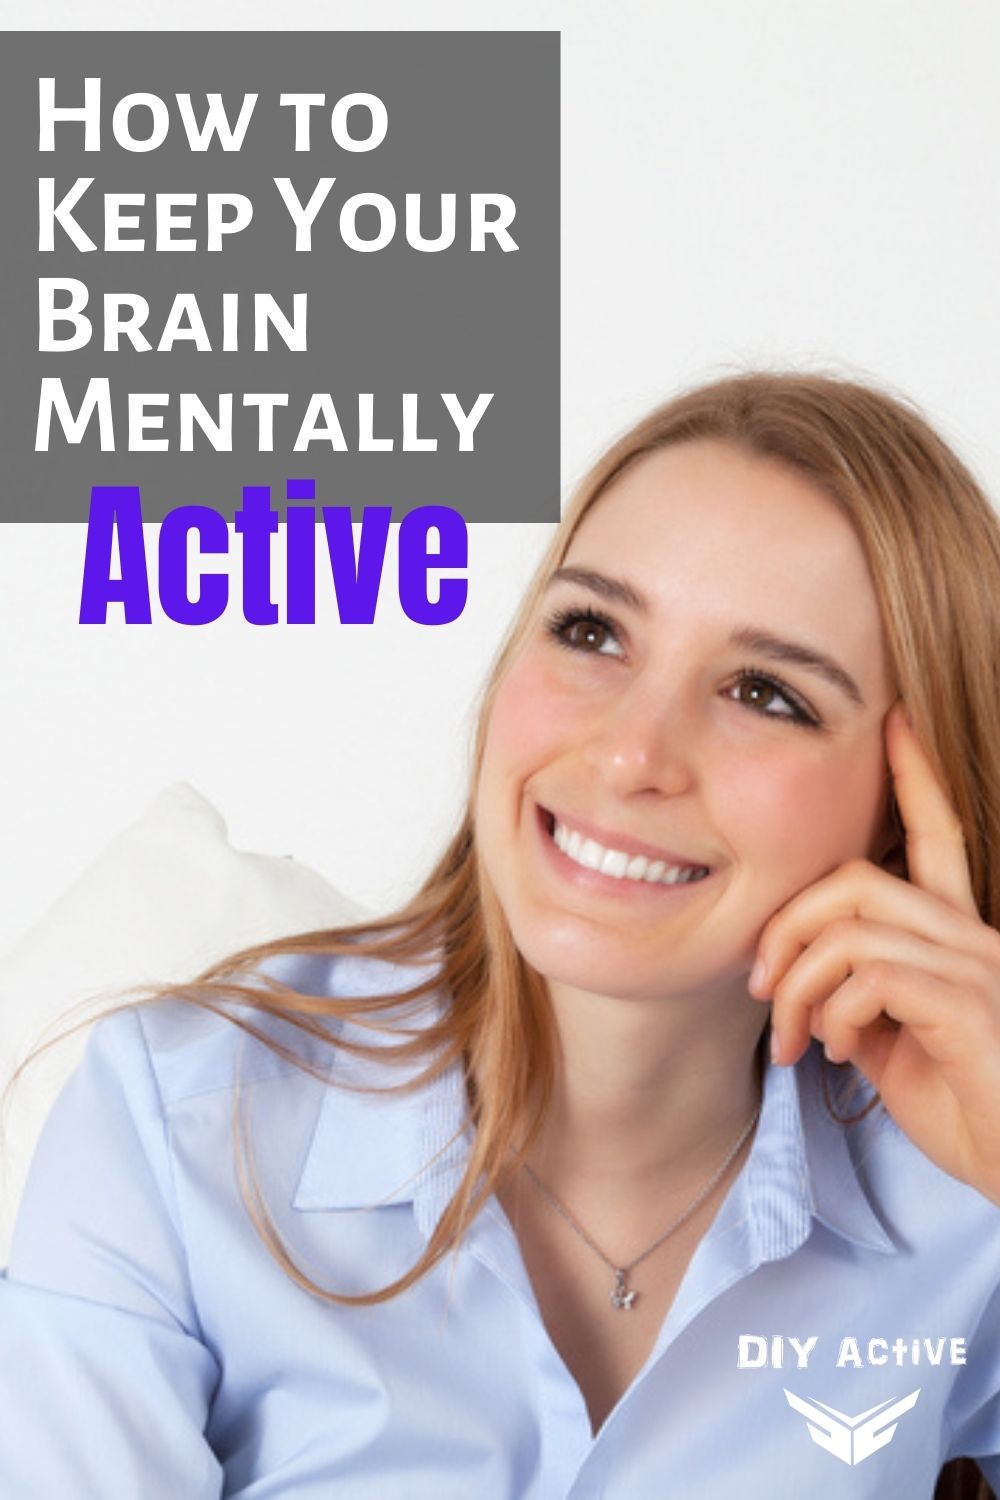 How to Keep Your Brain Mentally Active